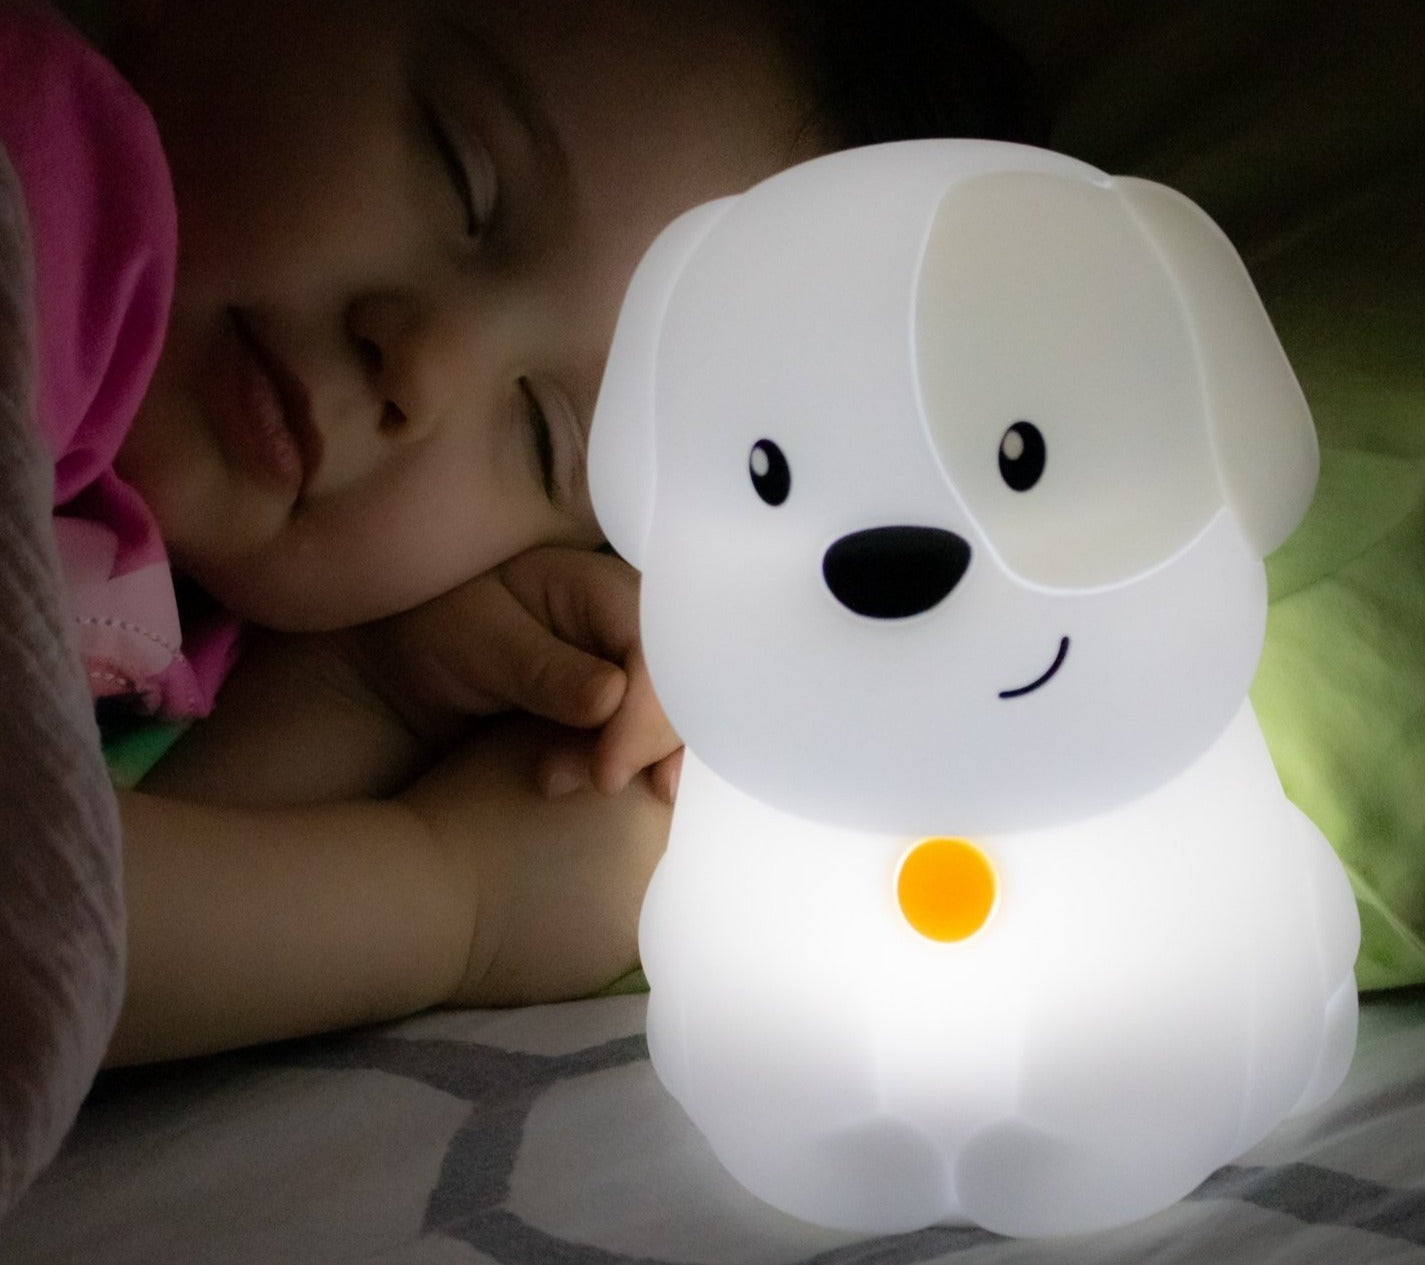 LED Baby Night Light Kids Cute Animal Silicone Touch Sensor Color Changing Gifts 